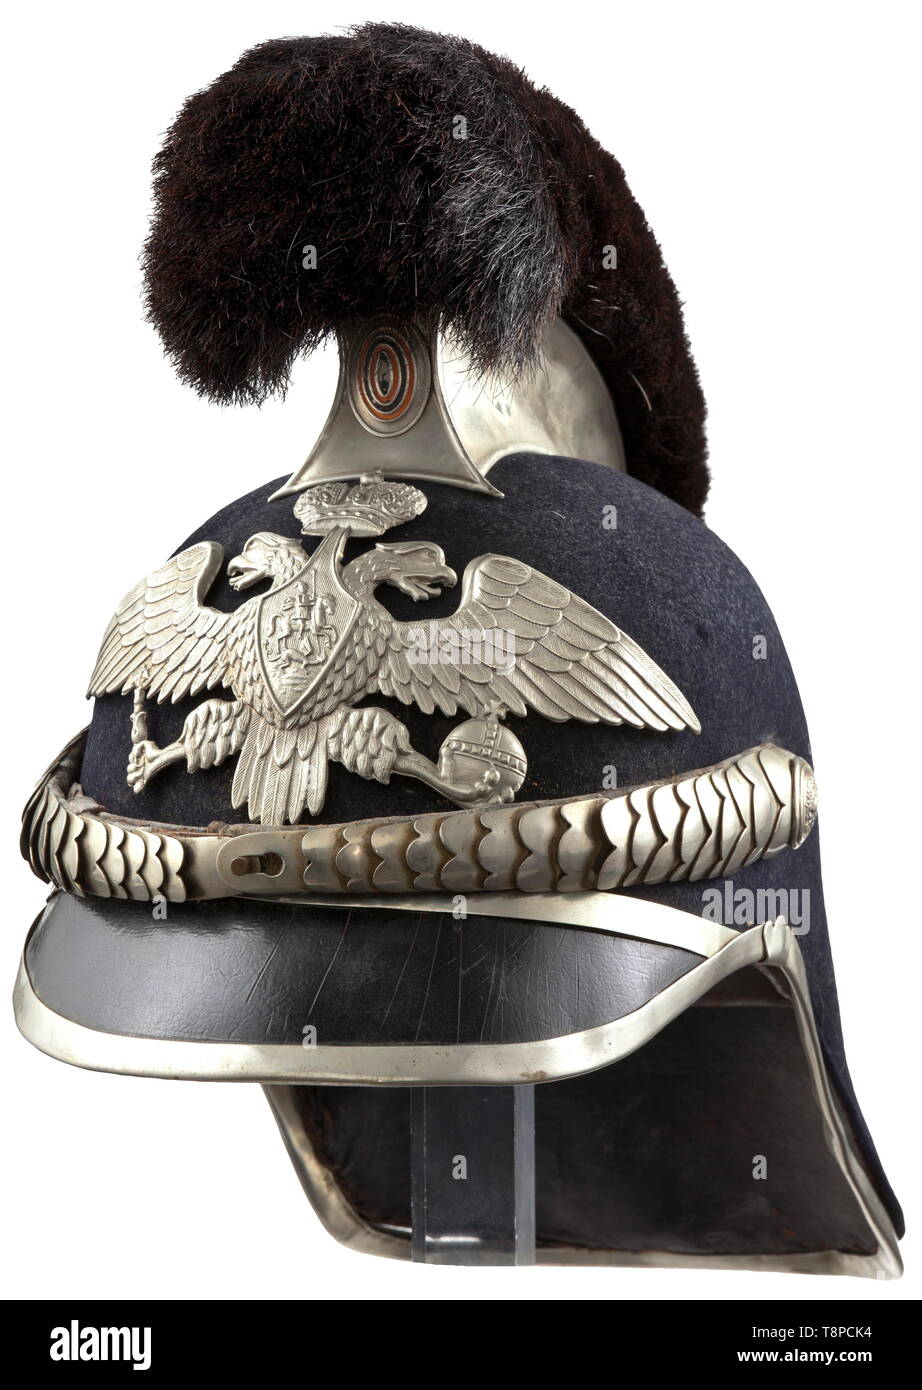 A Russian helmet for the Special Corps of the mounted country, fortress, division and railway police, from 1911 onwards Felt body, leather front visor, silver-coloured comb with horsehair crest, leather-backed chinscales, rosettes with the tsarist double-headed eagle. Applied, silver-plated double-headed eagle. Leather sweatband. Good condition. historic, historical, 20th century, Additional-Rights-Clearance-Info-Not-Available Stock Photo